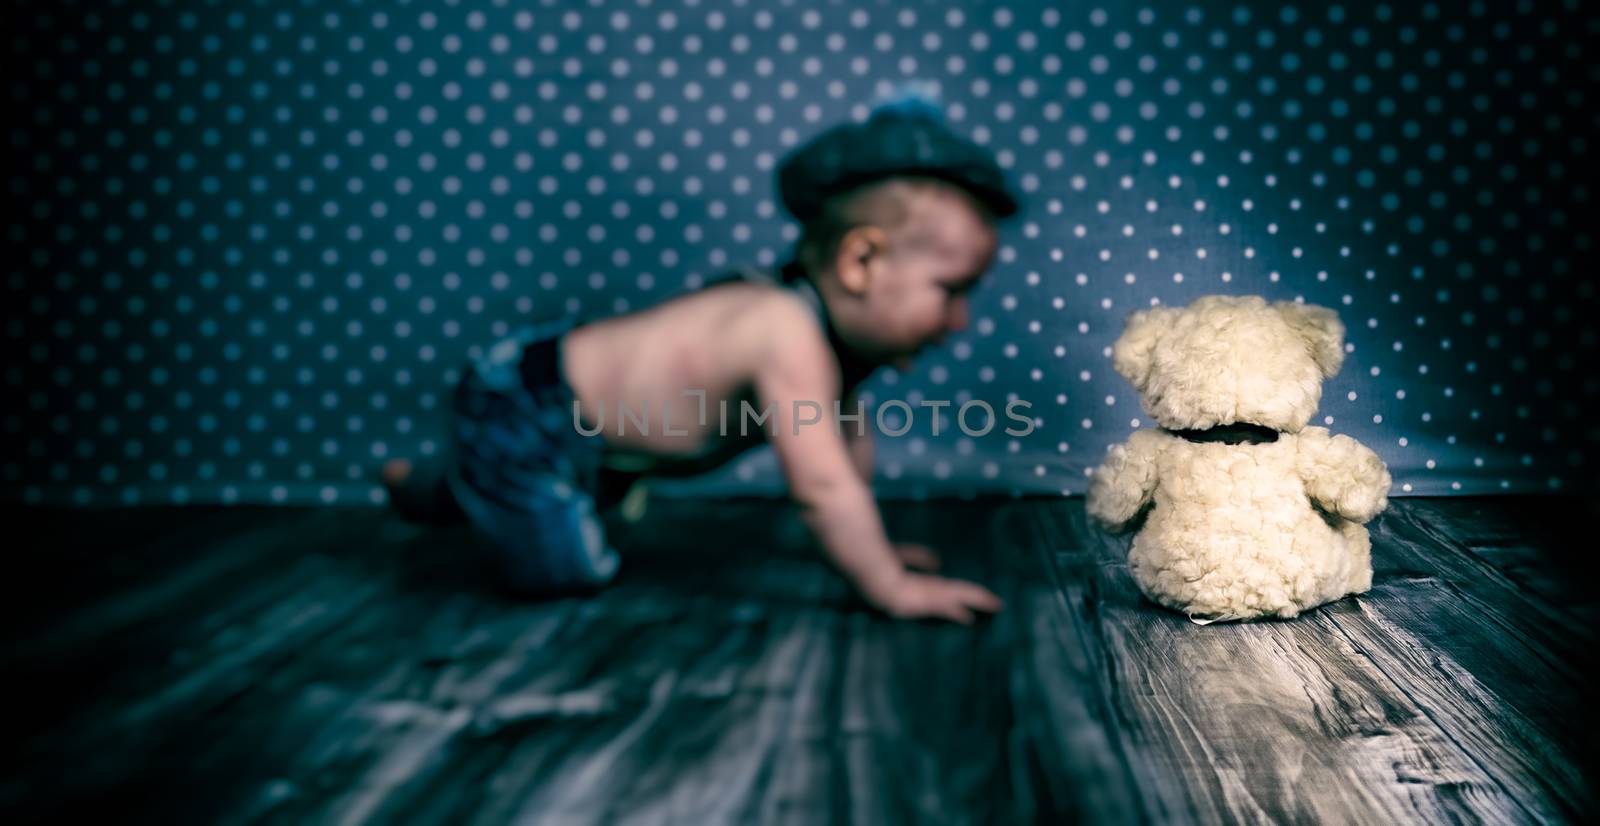 child with vintage hat and suspenders playing with teddy bear